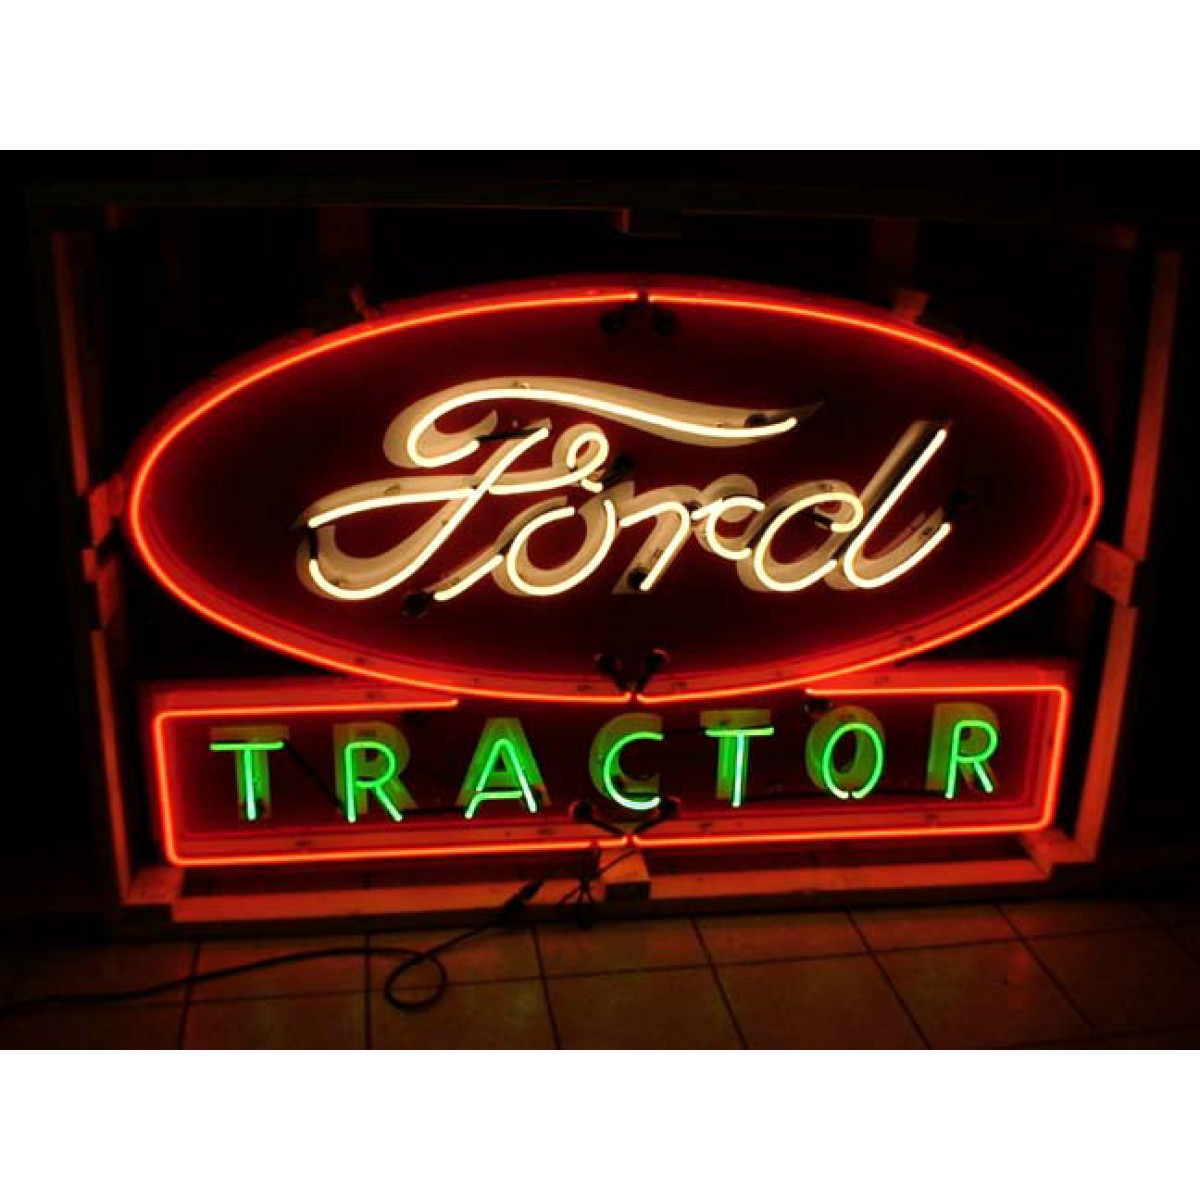 Antique ford neon sign #5